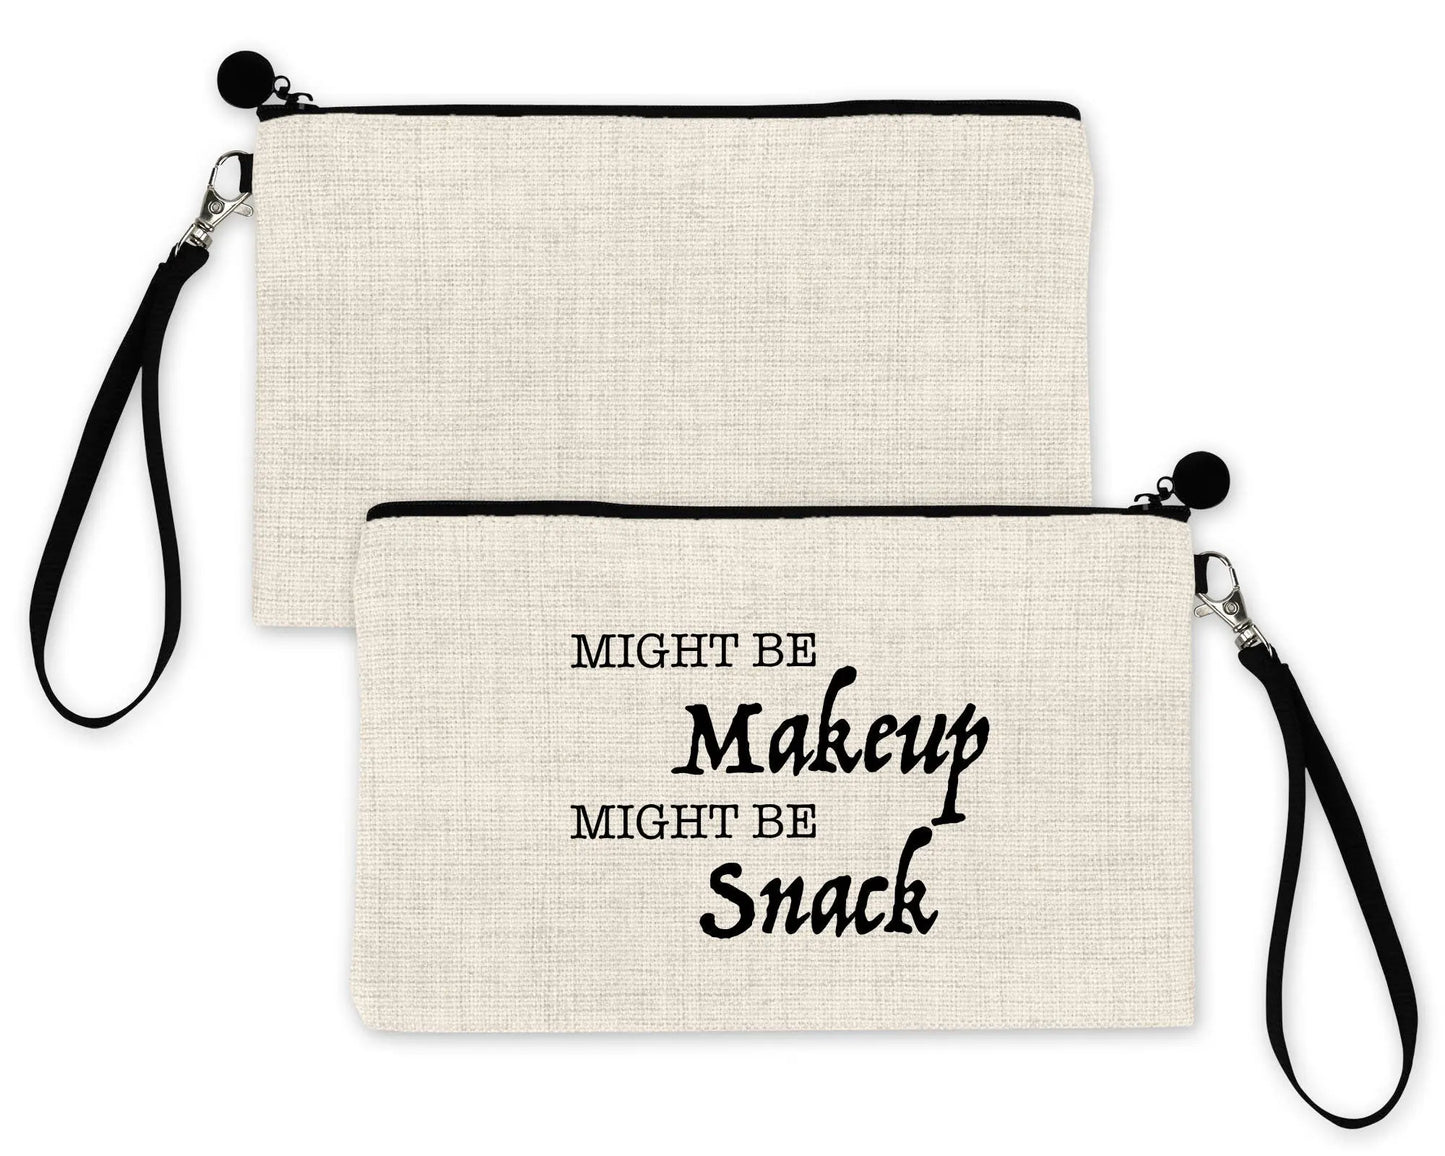 Audrey Hepburn Inspired Bag Organizer with Name, Gift Ideas Pouch for Girlfriends